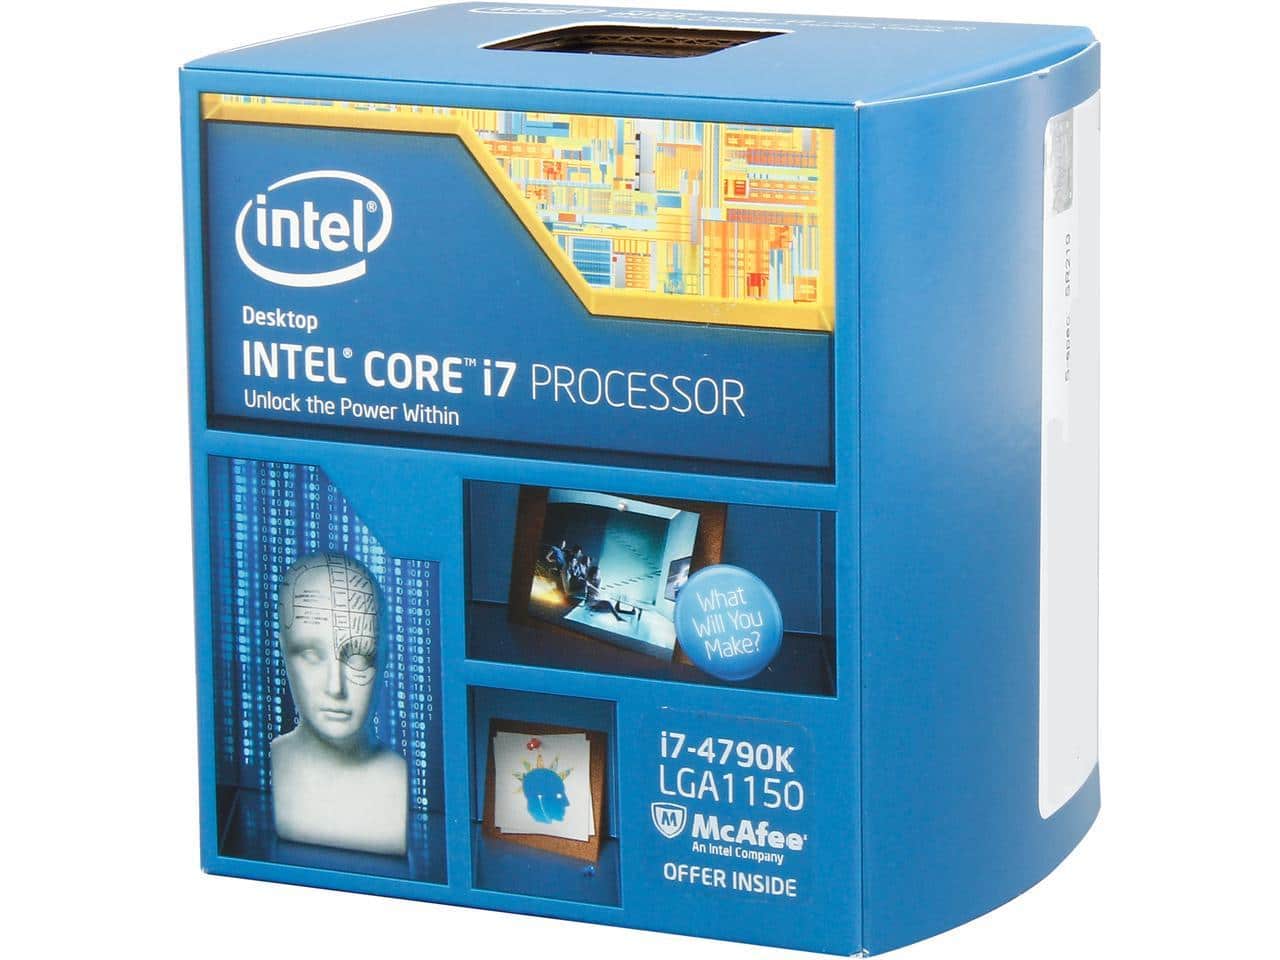 Looking For Performance? Get The Intel I7-4790K GHz Quad Core  Hyperthreading Unlocked 22nm Haswell (Devil's Canyon) Socket LGA1150  Desktop CPU Today For R6390 In South Africa!